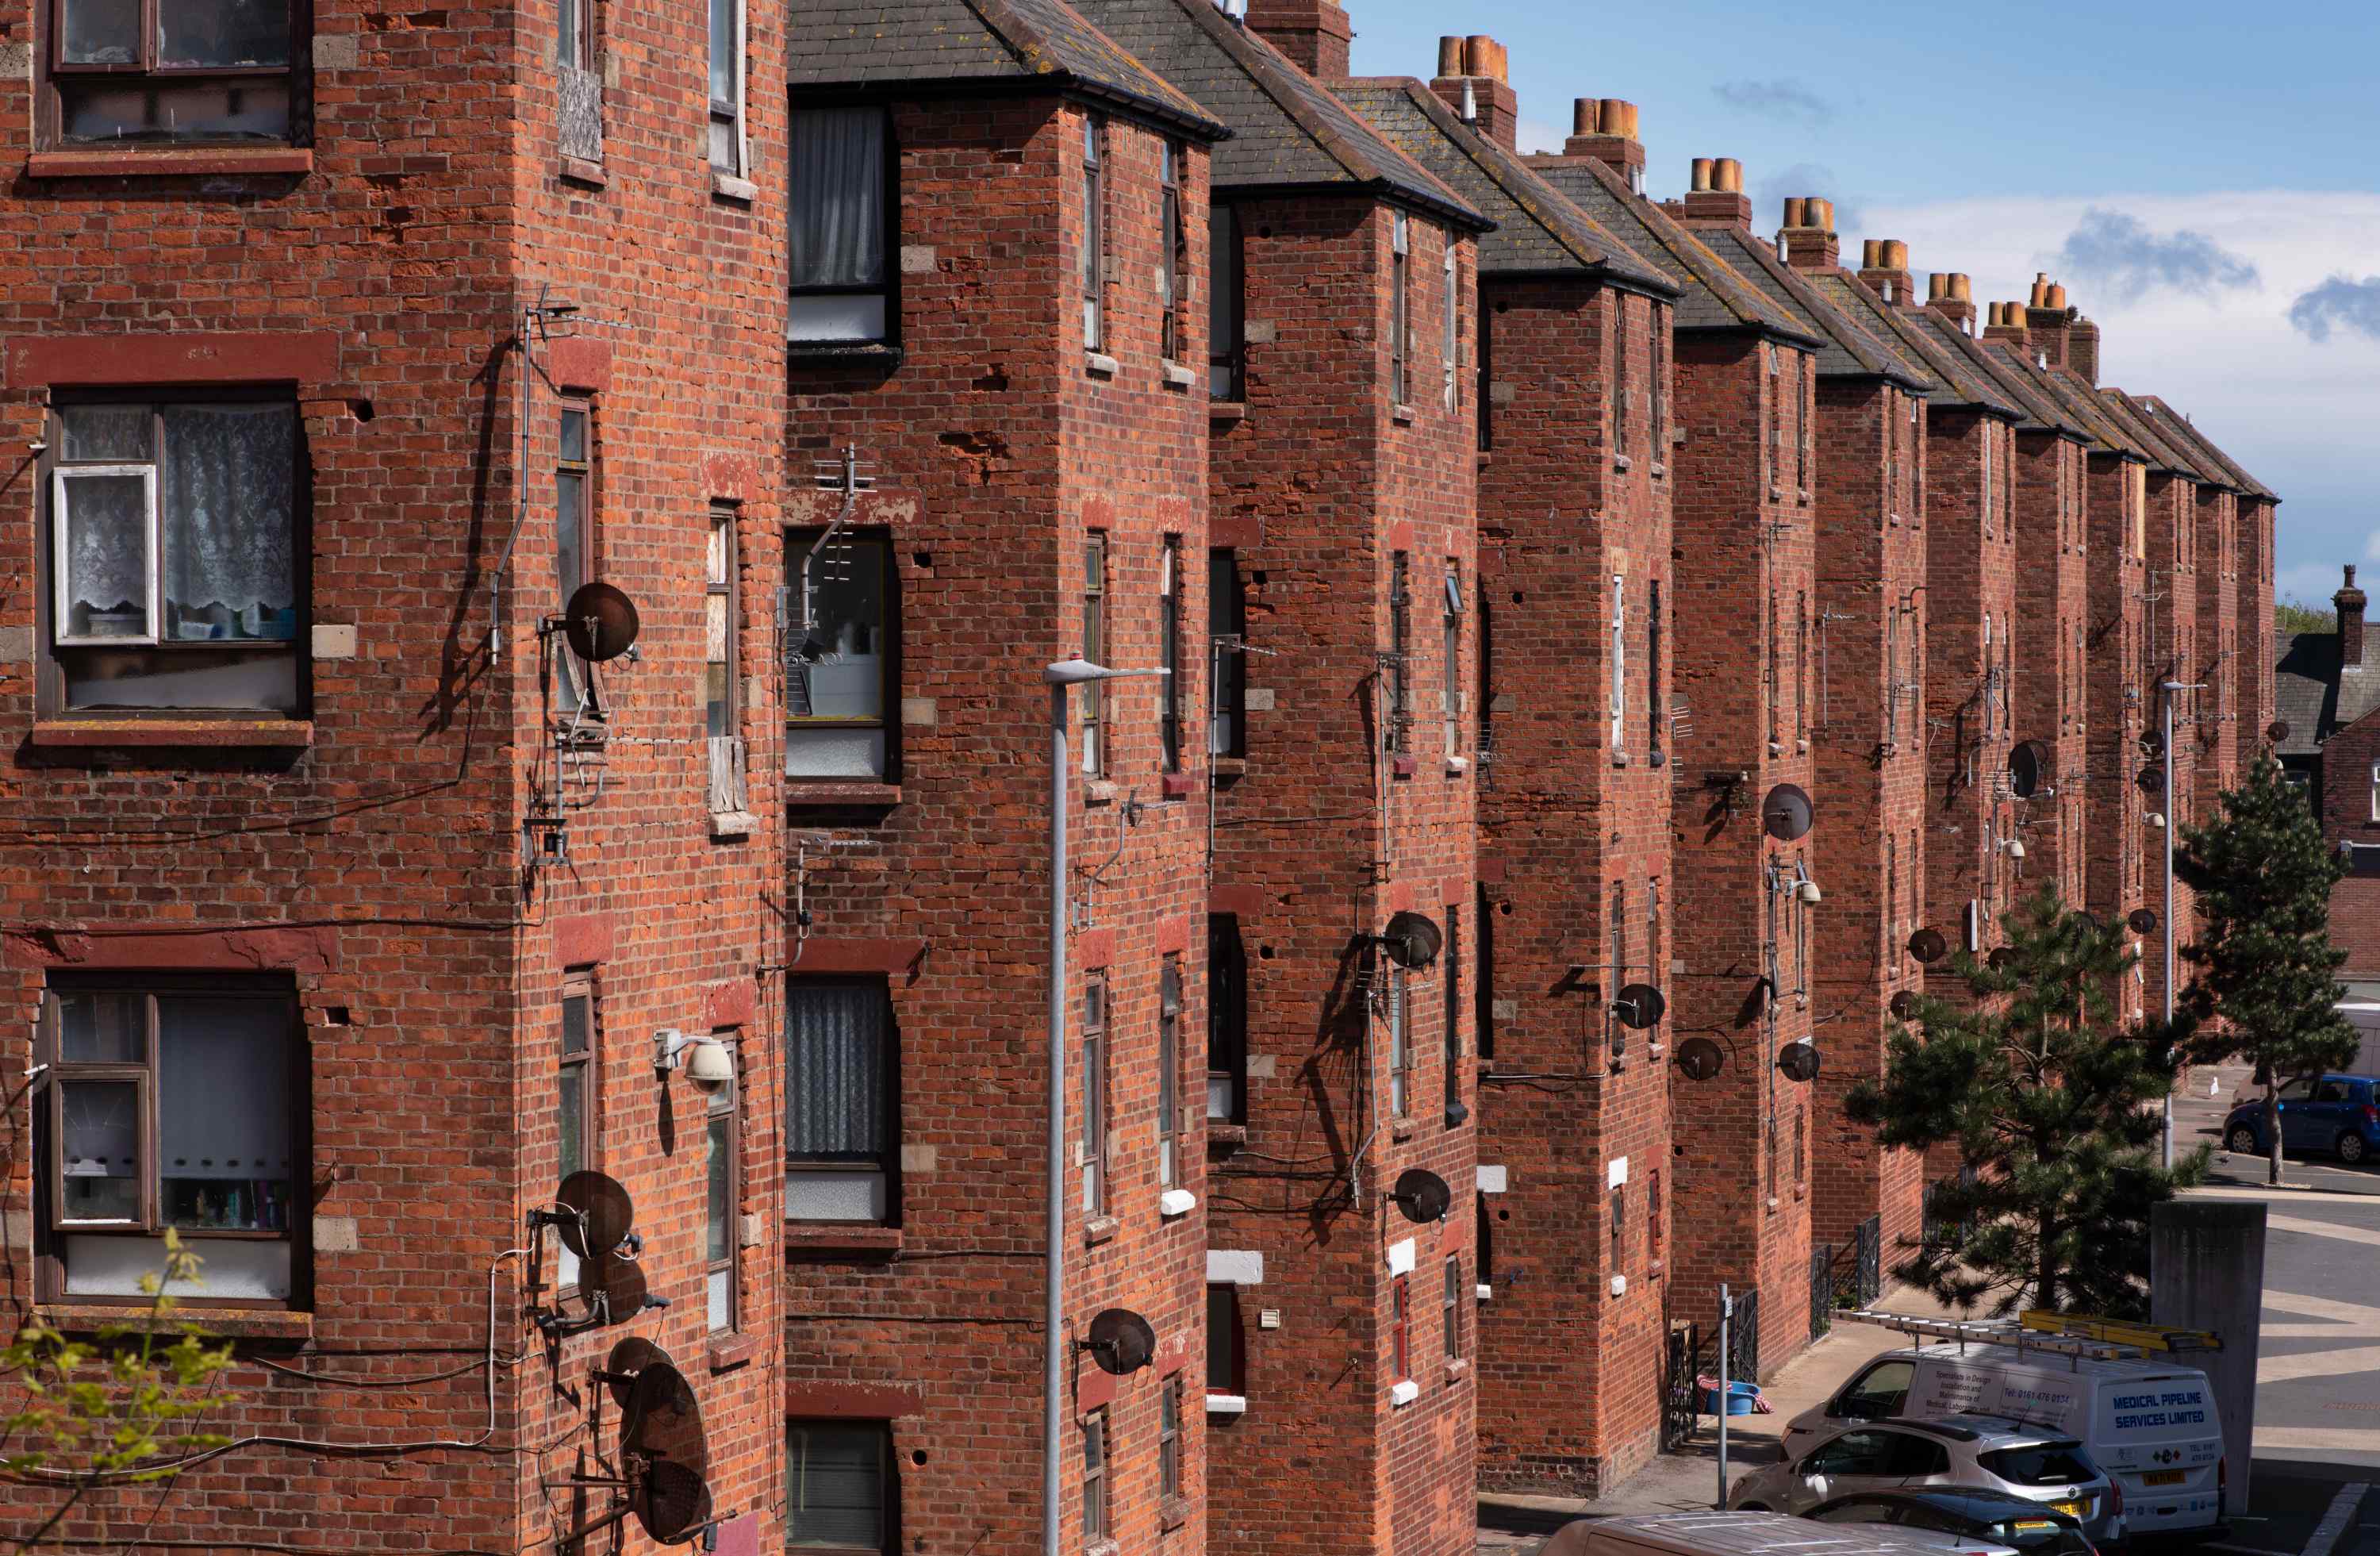 A photograph of a red brick tenement block building with numerous windows and satellite dishes